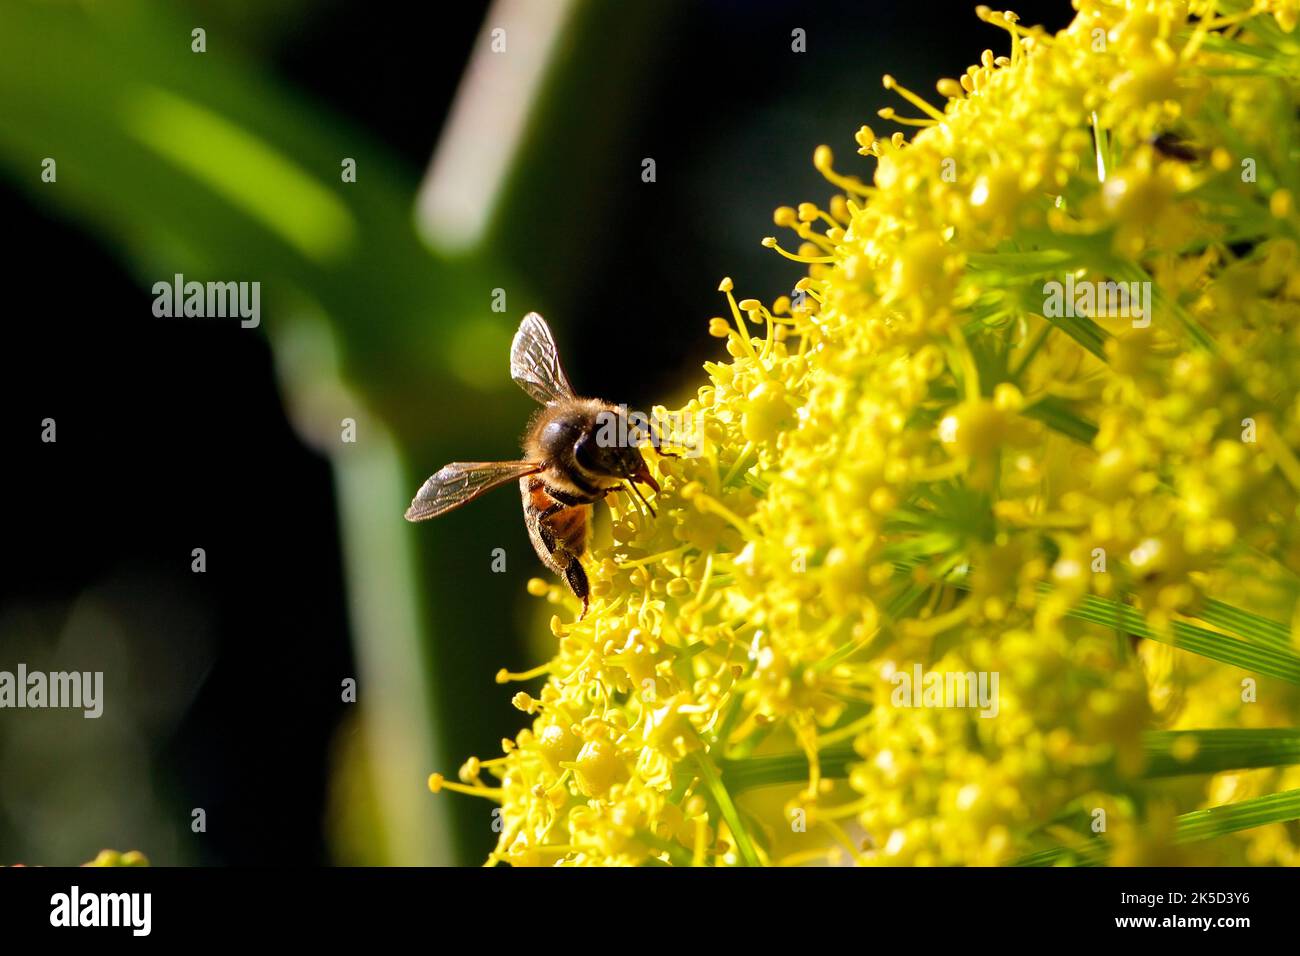 Italy, Sicily, Zingaro National Park, spring, macro, details of a large flower consisting of many small yellow flowers, bee, background blurred Stock Photo